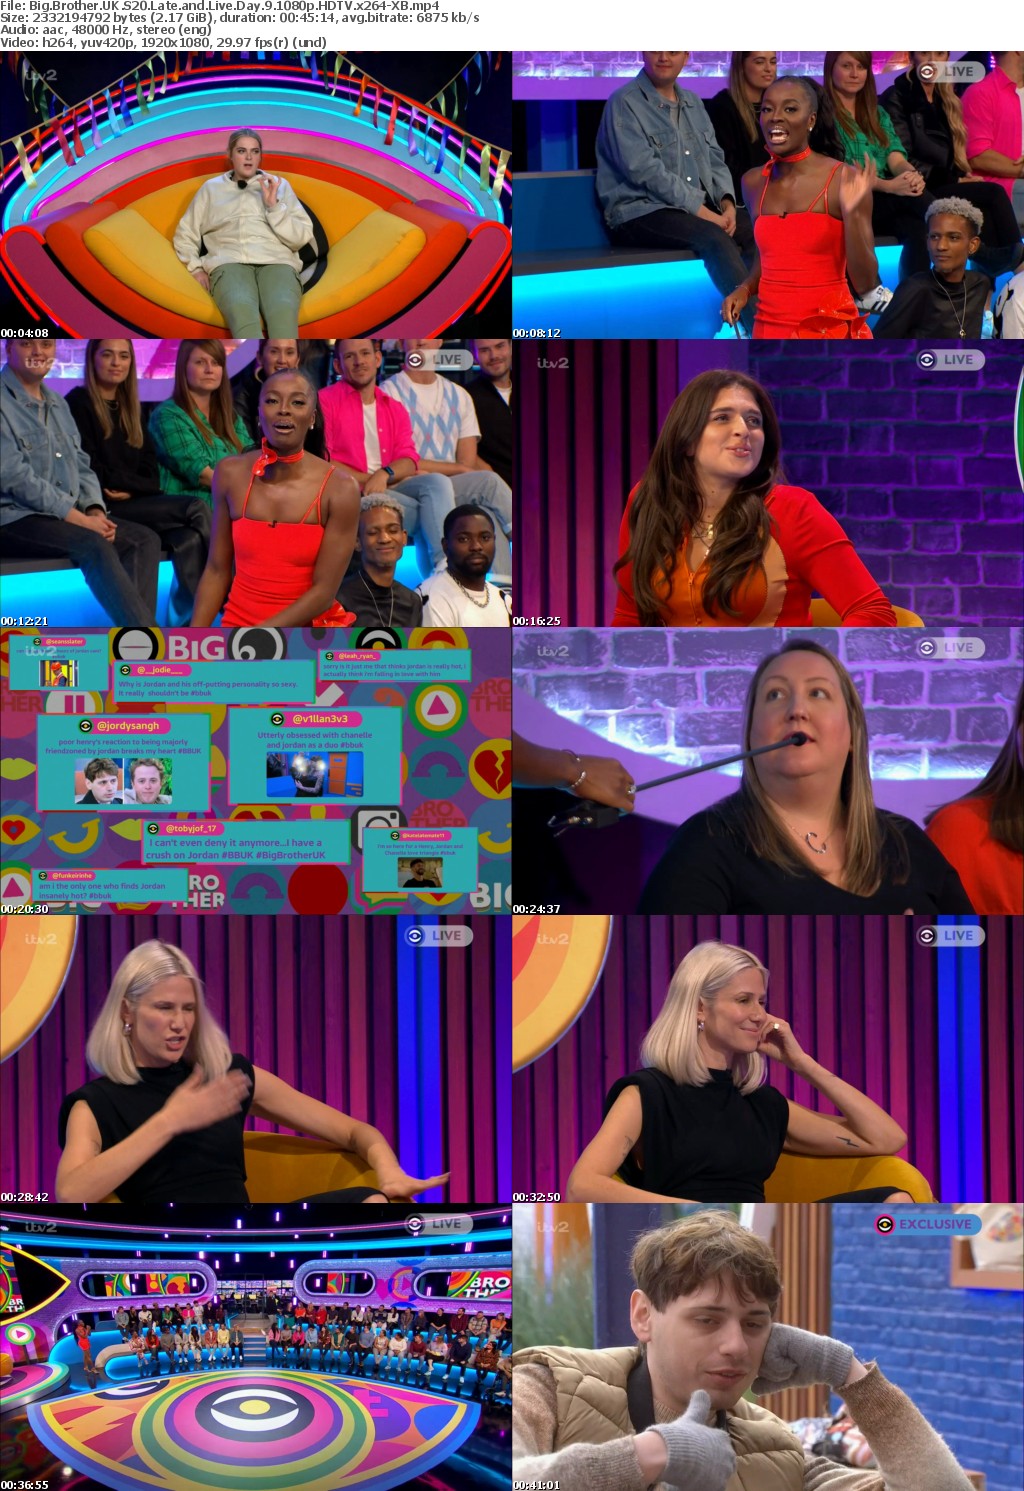 Big Brother UK S20 Late and Live Day 9 1080p HDTV x264-XB